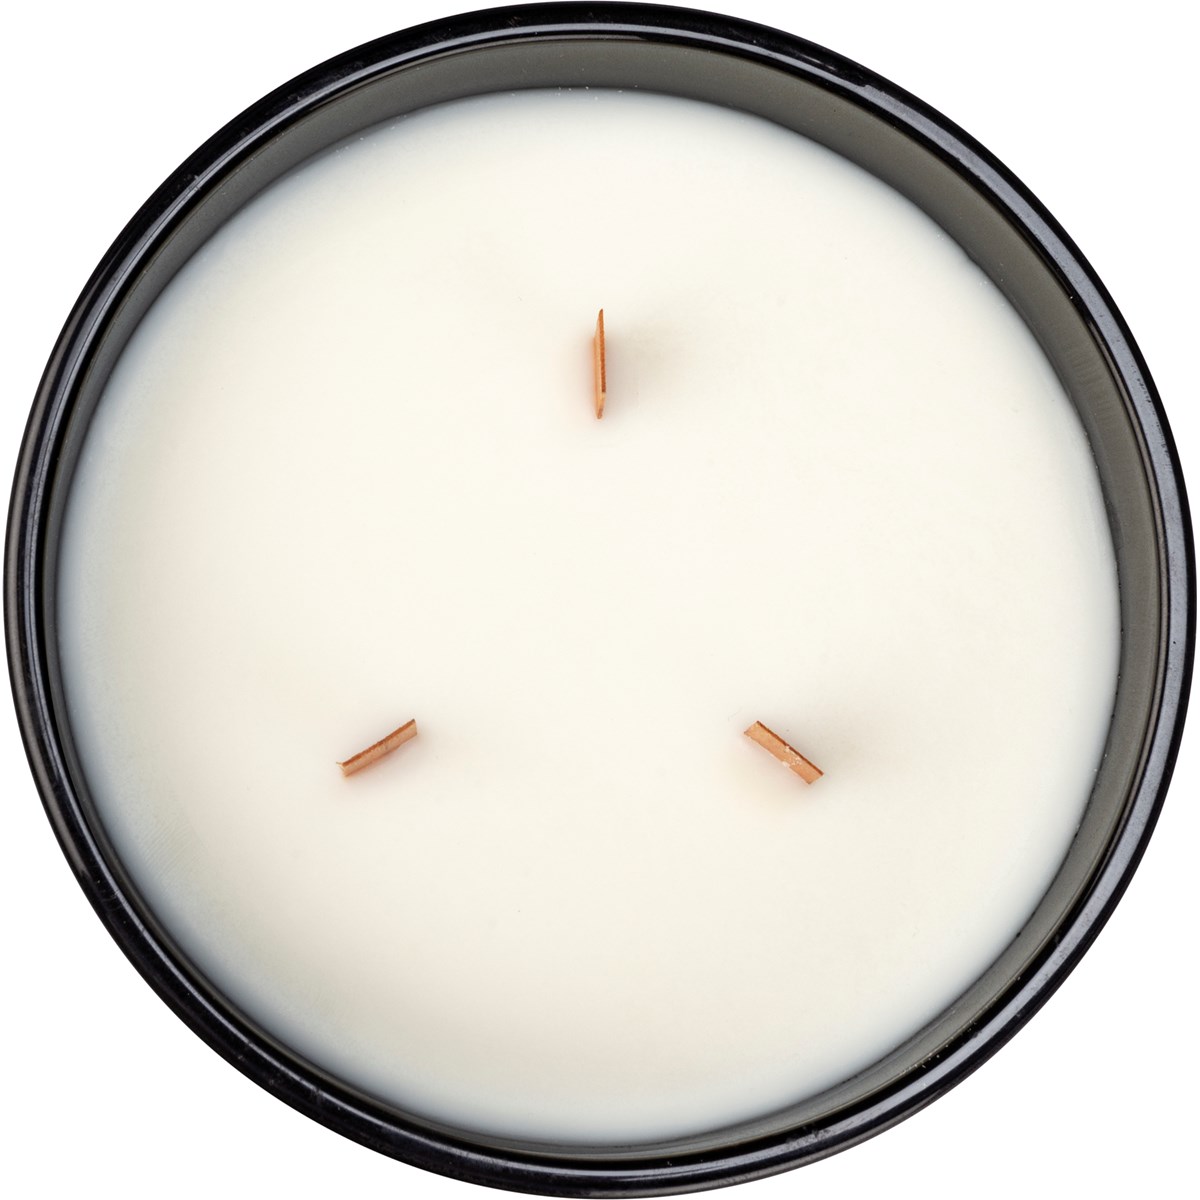 The Boss Jar Candle - Soy Wax, Glass, Wood